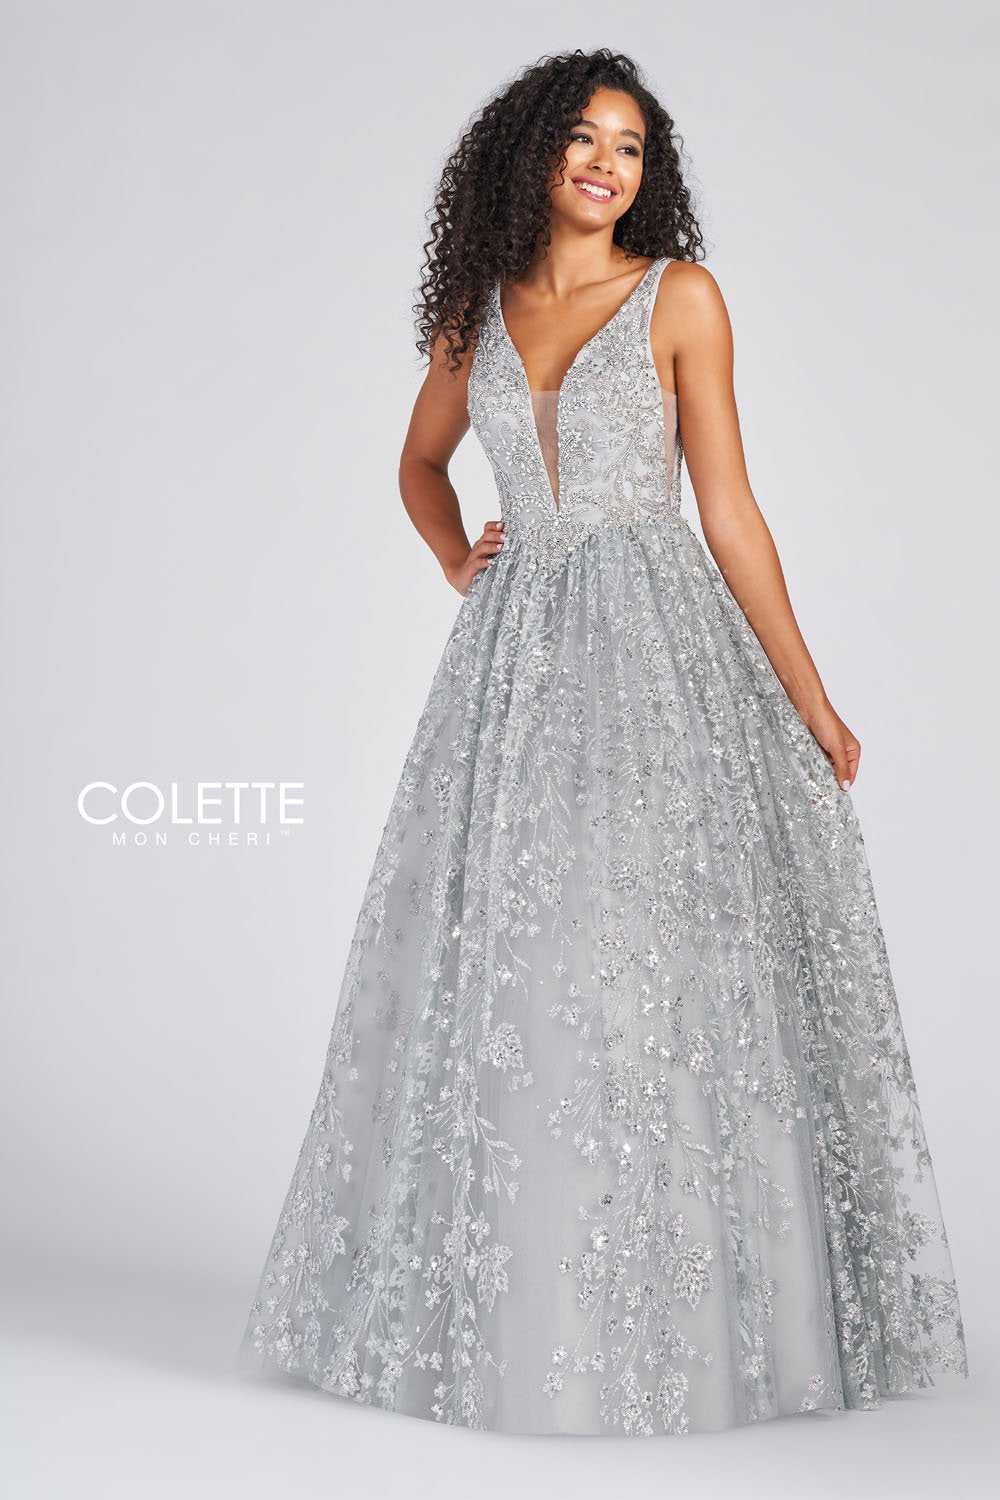 Colette CL12237 Silver prom dresses.  Silver prom dresses image by Colette.